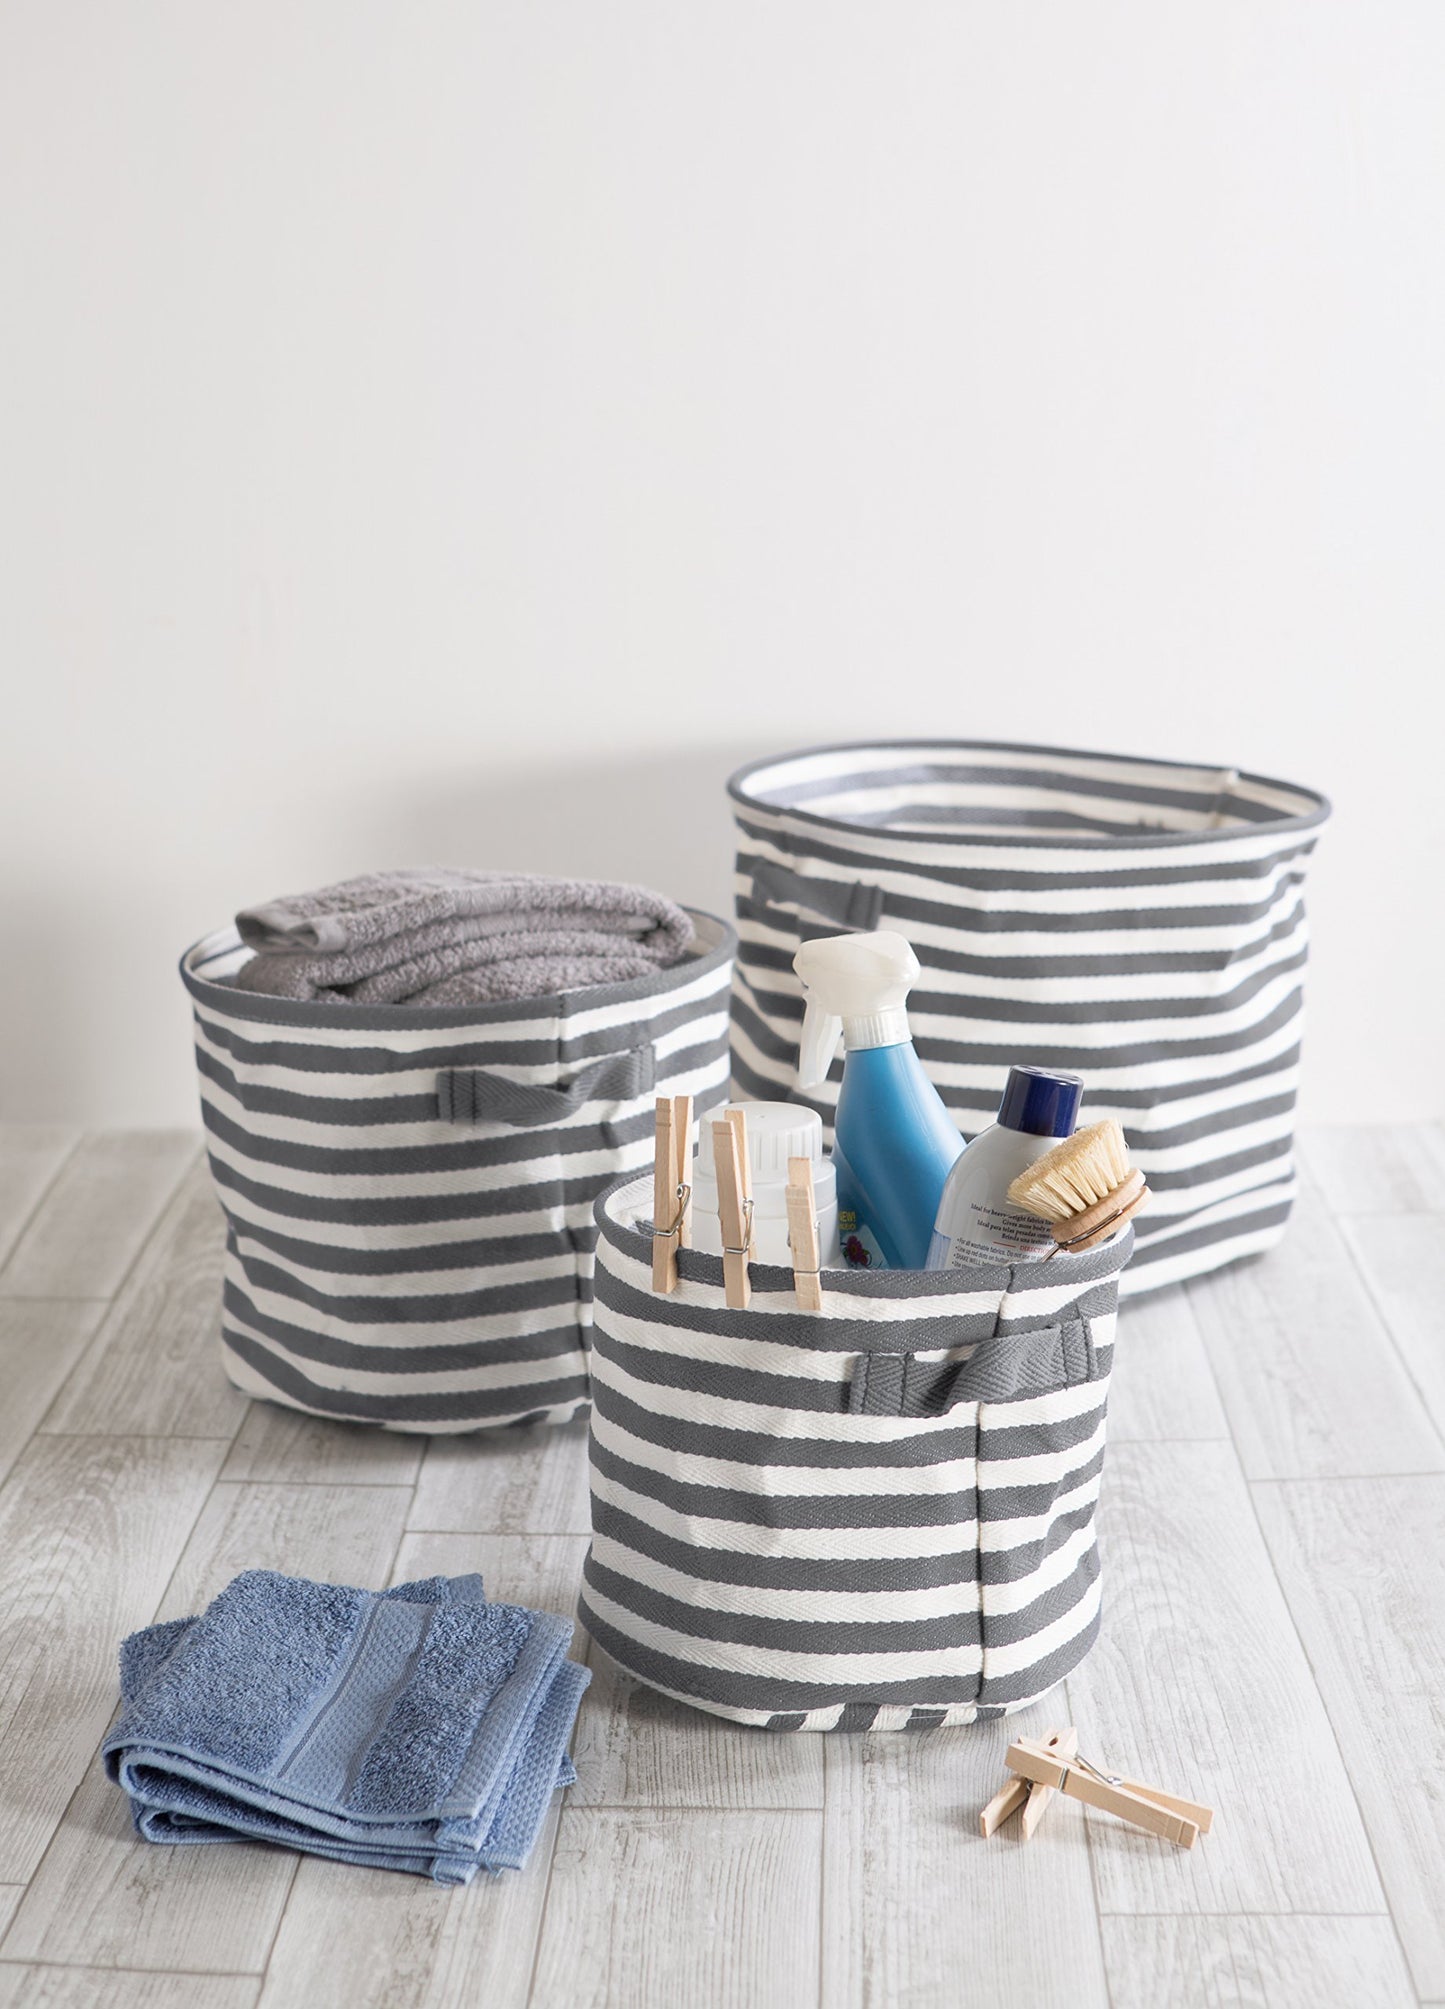 Shop here dii fabric round room nurseries closets everyday storage needs asst set of 3 gray stripe laundry bin assorted sizes